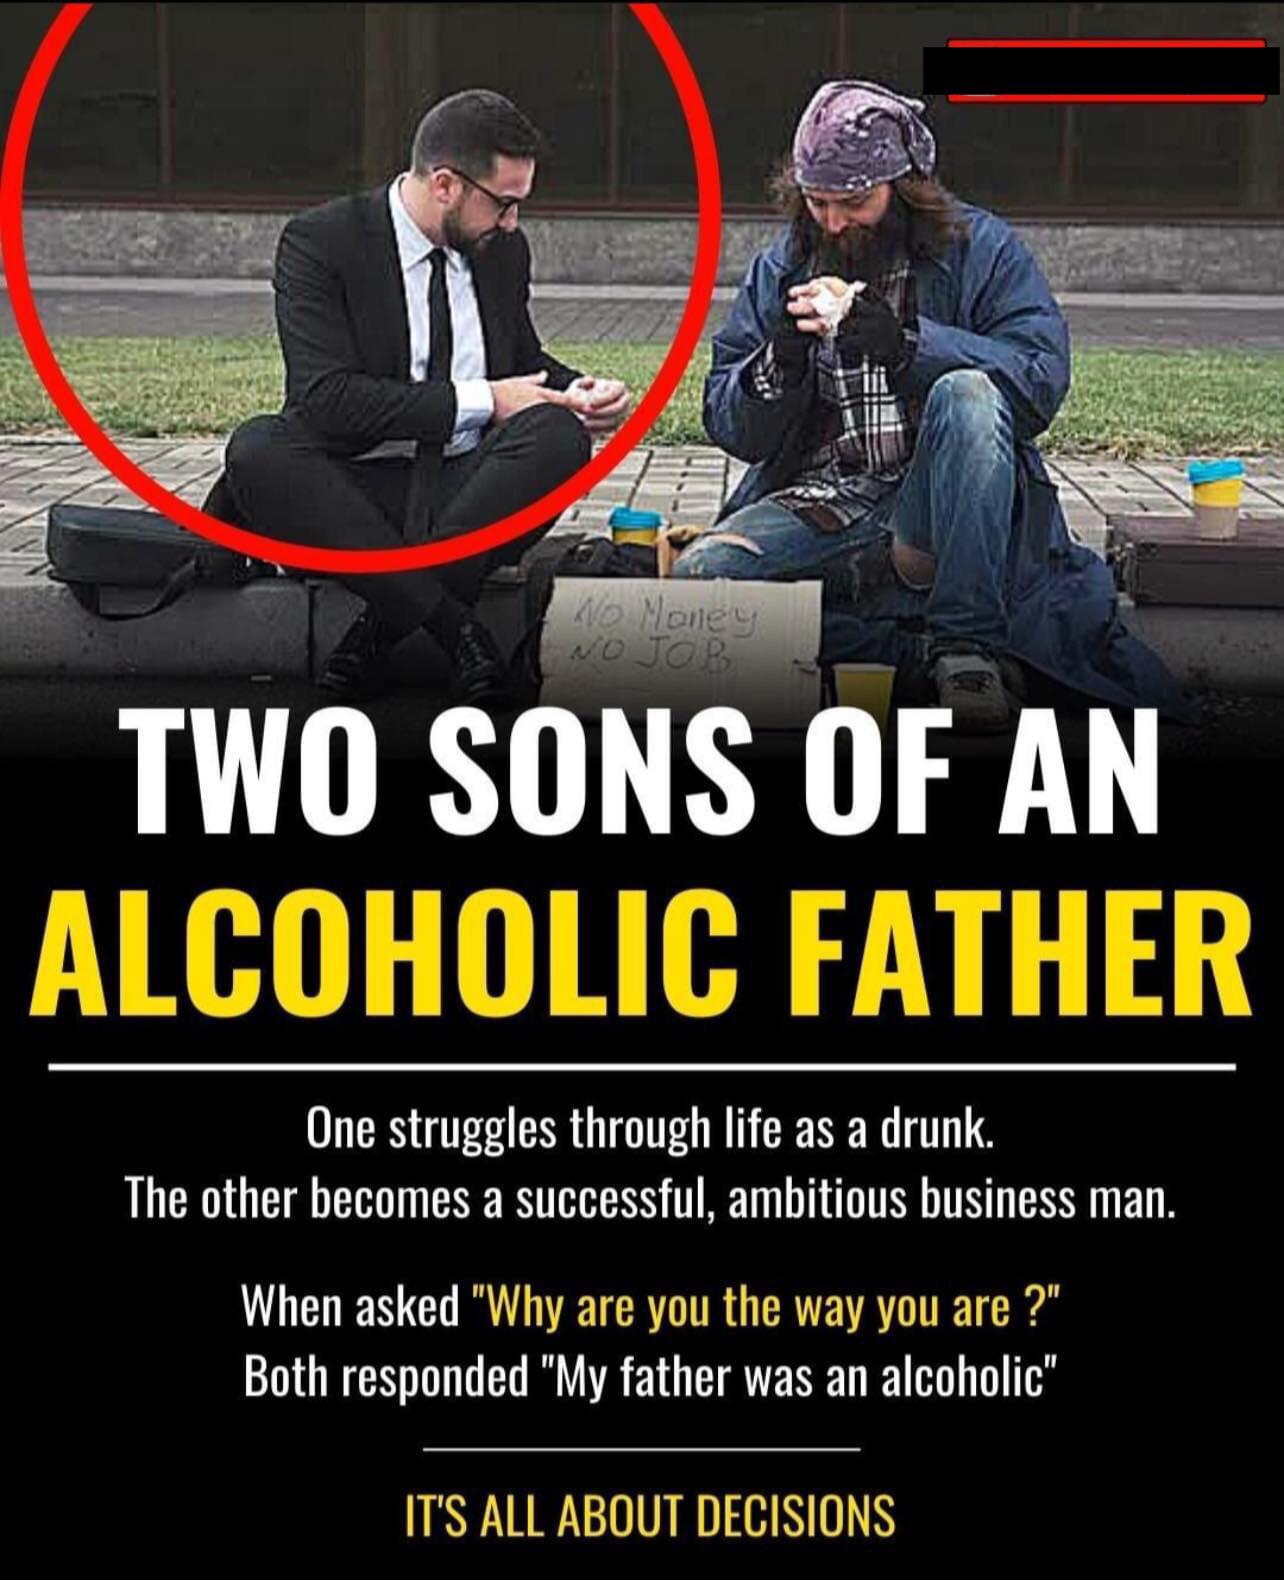 cringe pics - wtf pics - photo aption - Ho Noiley Wo Job Two Sons Of An Alcoholic Father One struggles through life as a drunk. The other becomes a successful, ambitious business man. When asked "Why are you the way you are ?" Both responded "My father wa